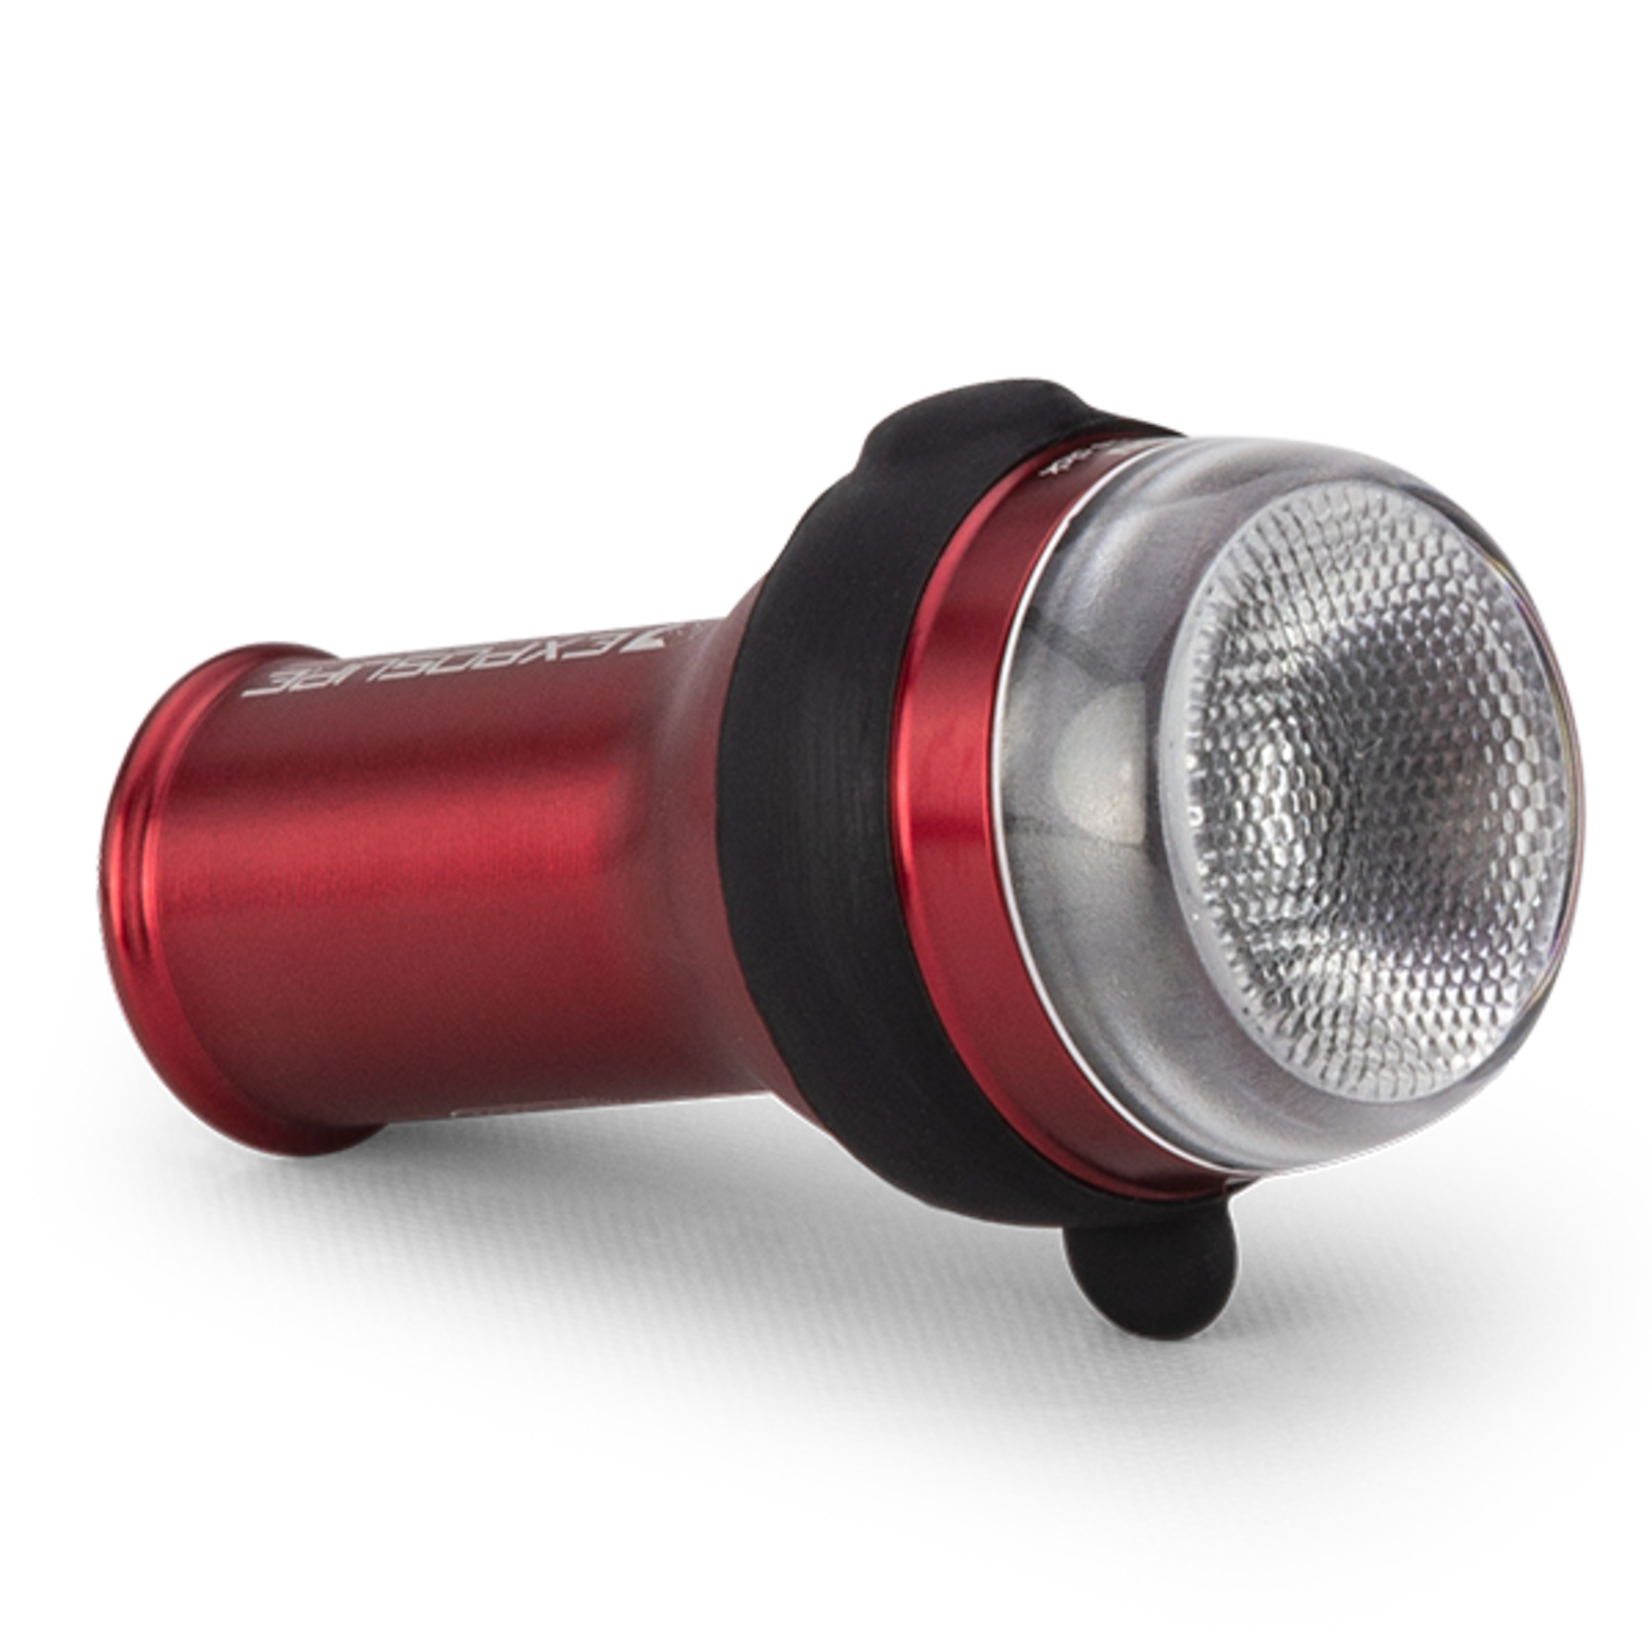 Light Exposure Exposure Lights Tracer USB Rechargeable Rear Light With Day Bright Mode